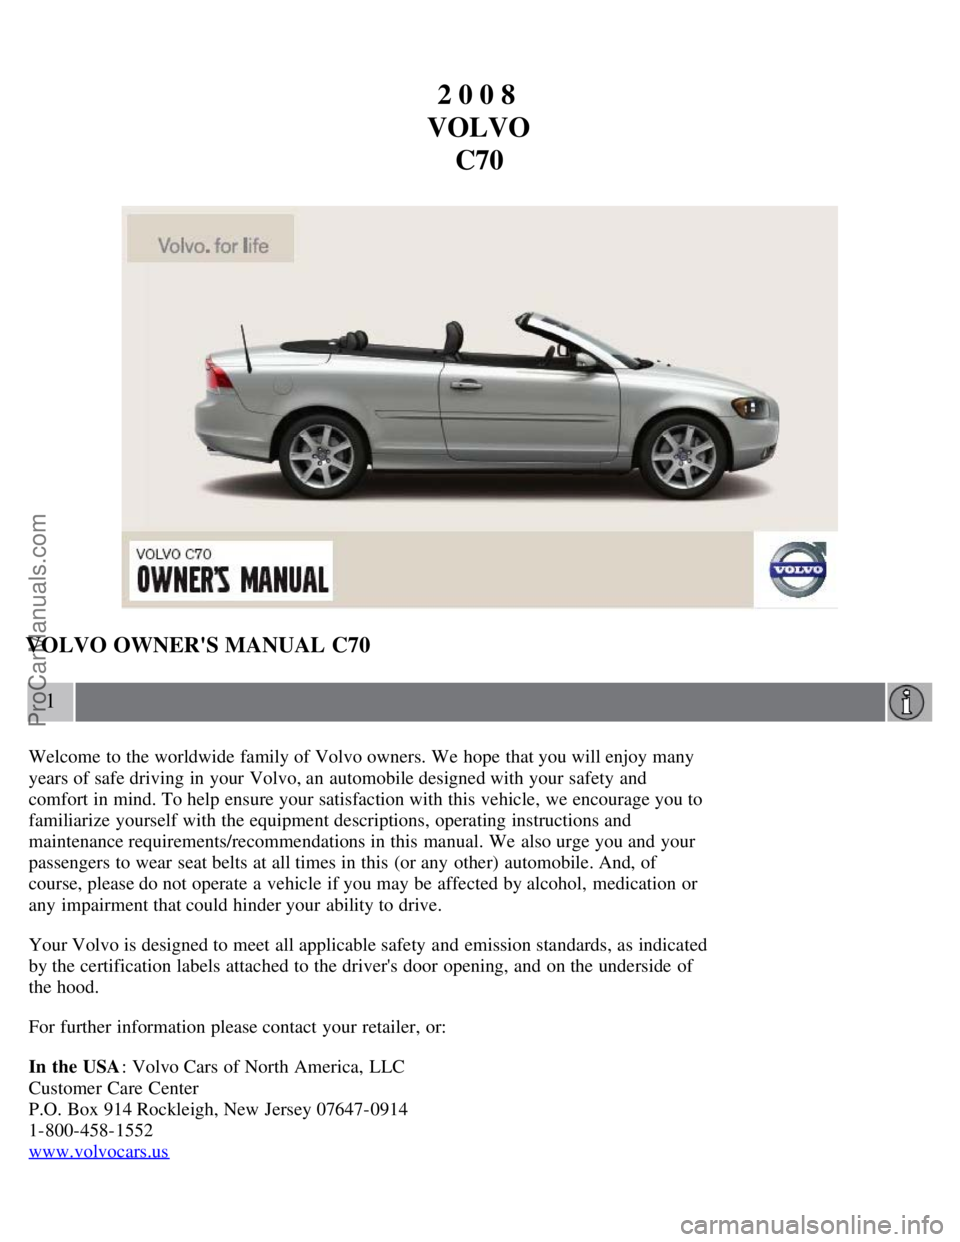 VOLVO C70 2008  Owners Manual 2 0 0 8 
VOLVO C70
VOLVO OWNERS MANUAL C70
1
Welcome to the worldwide family of Volvo owners. We hope  that you will enjoy many
years of safe driving in your Volvo, an  automobile designed with your 